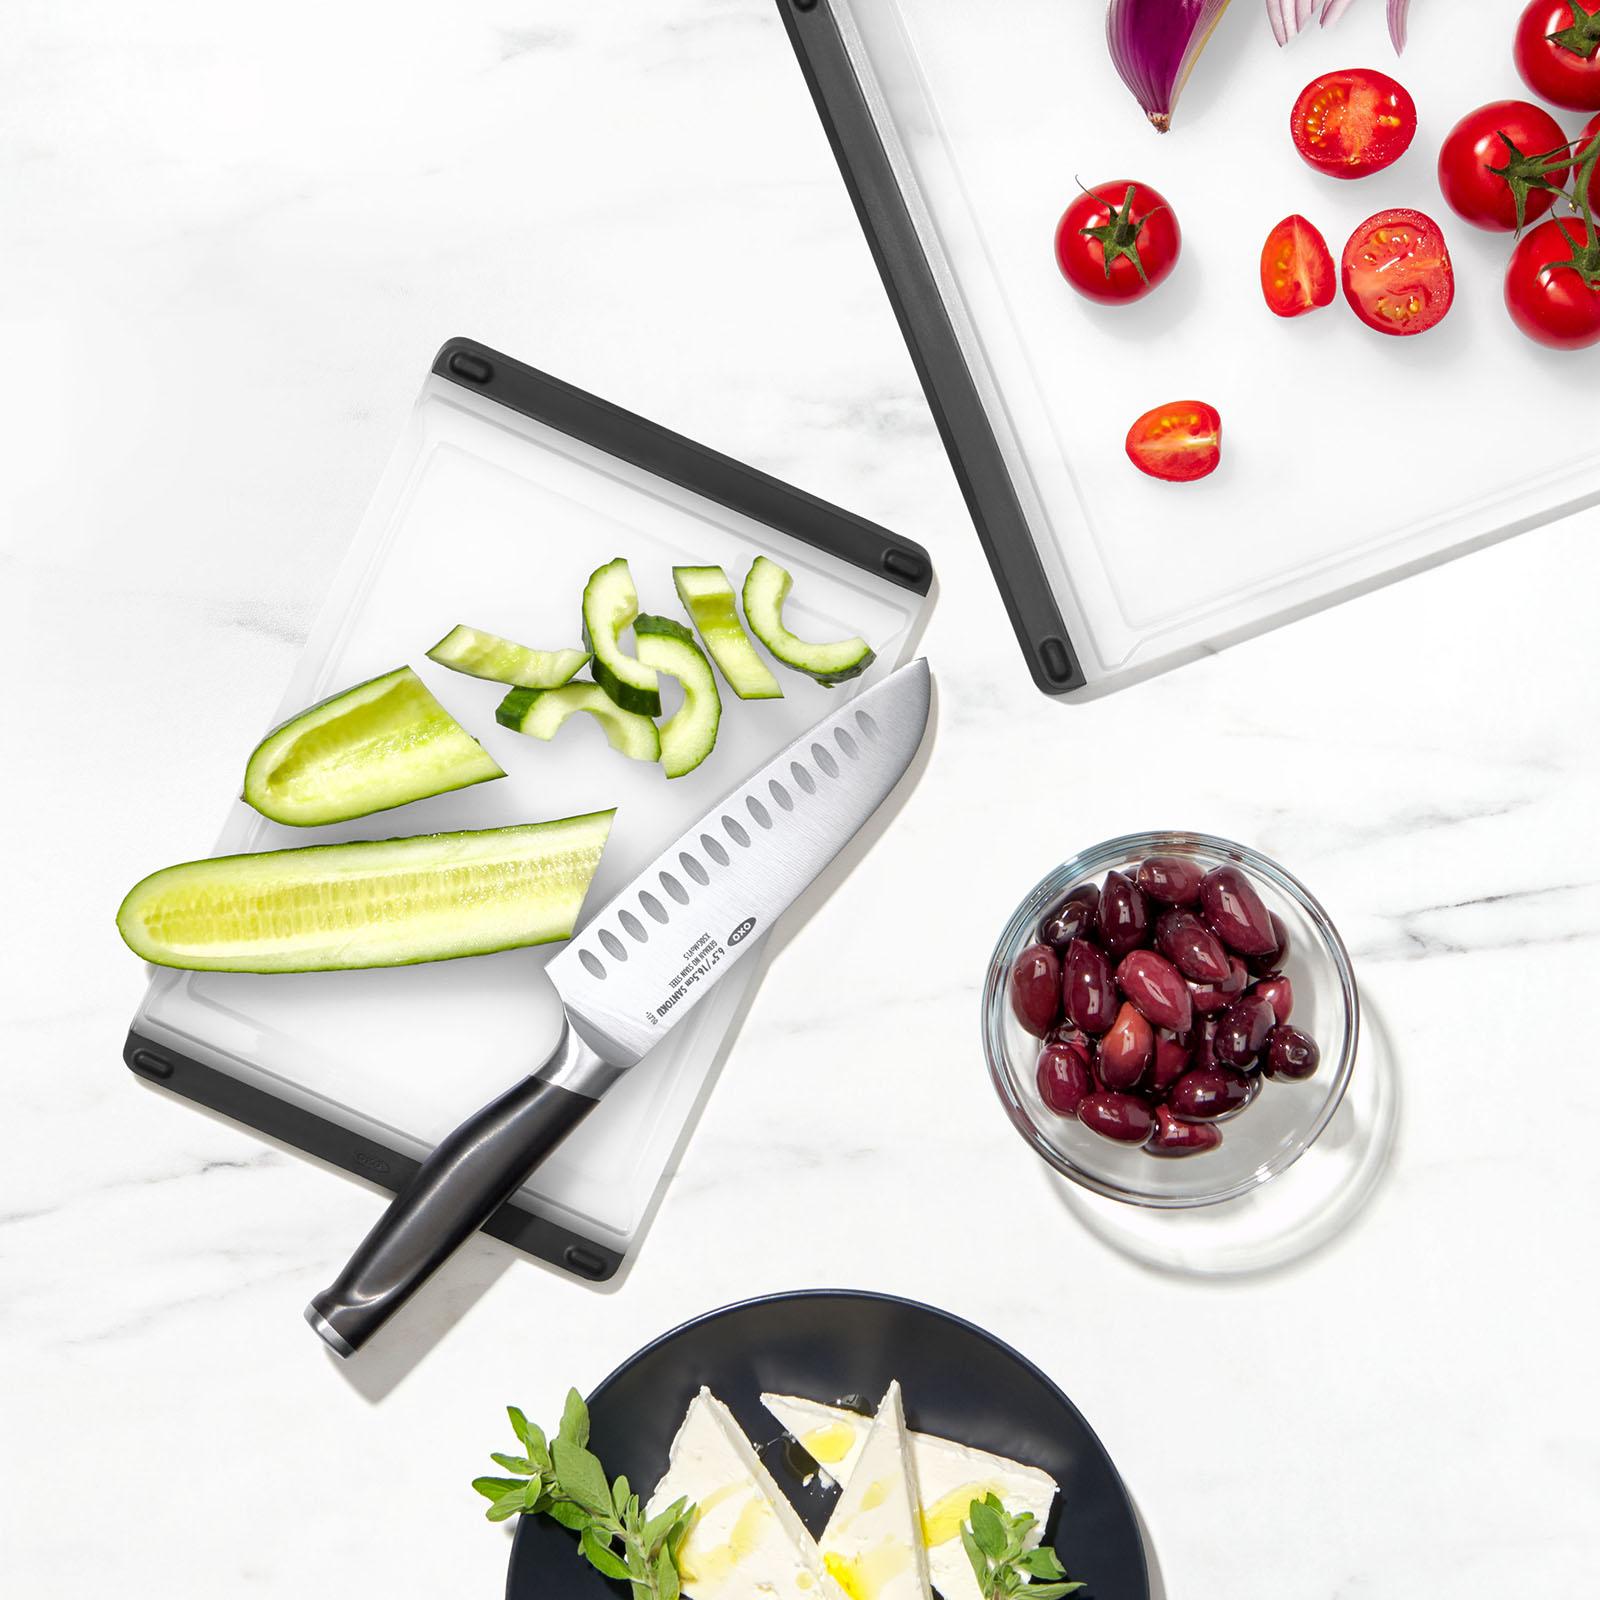 Oxo Good Grips Utility Cutting Board Review: A Must-Read Review